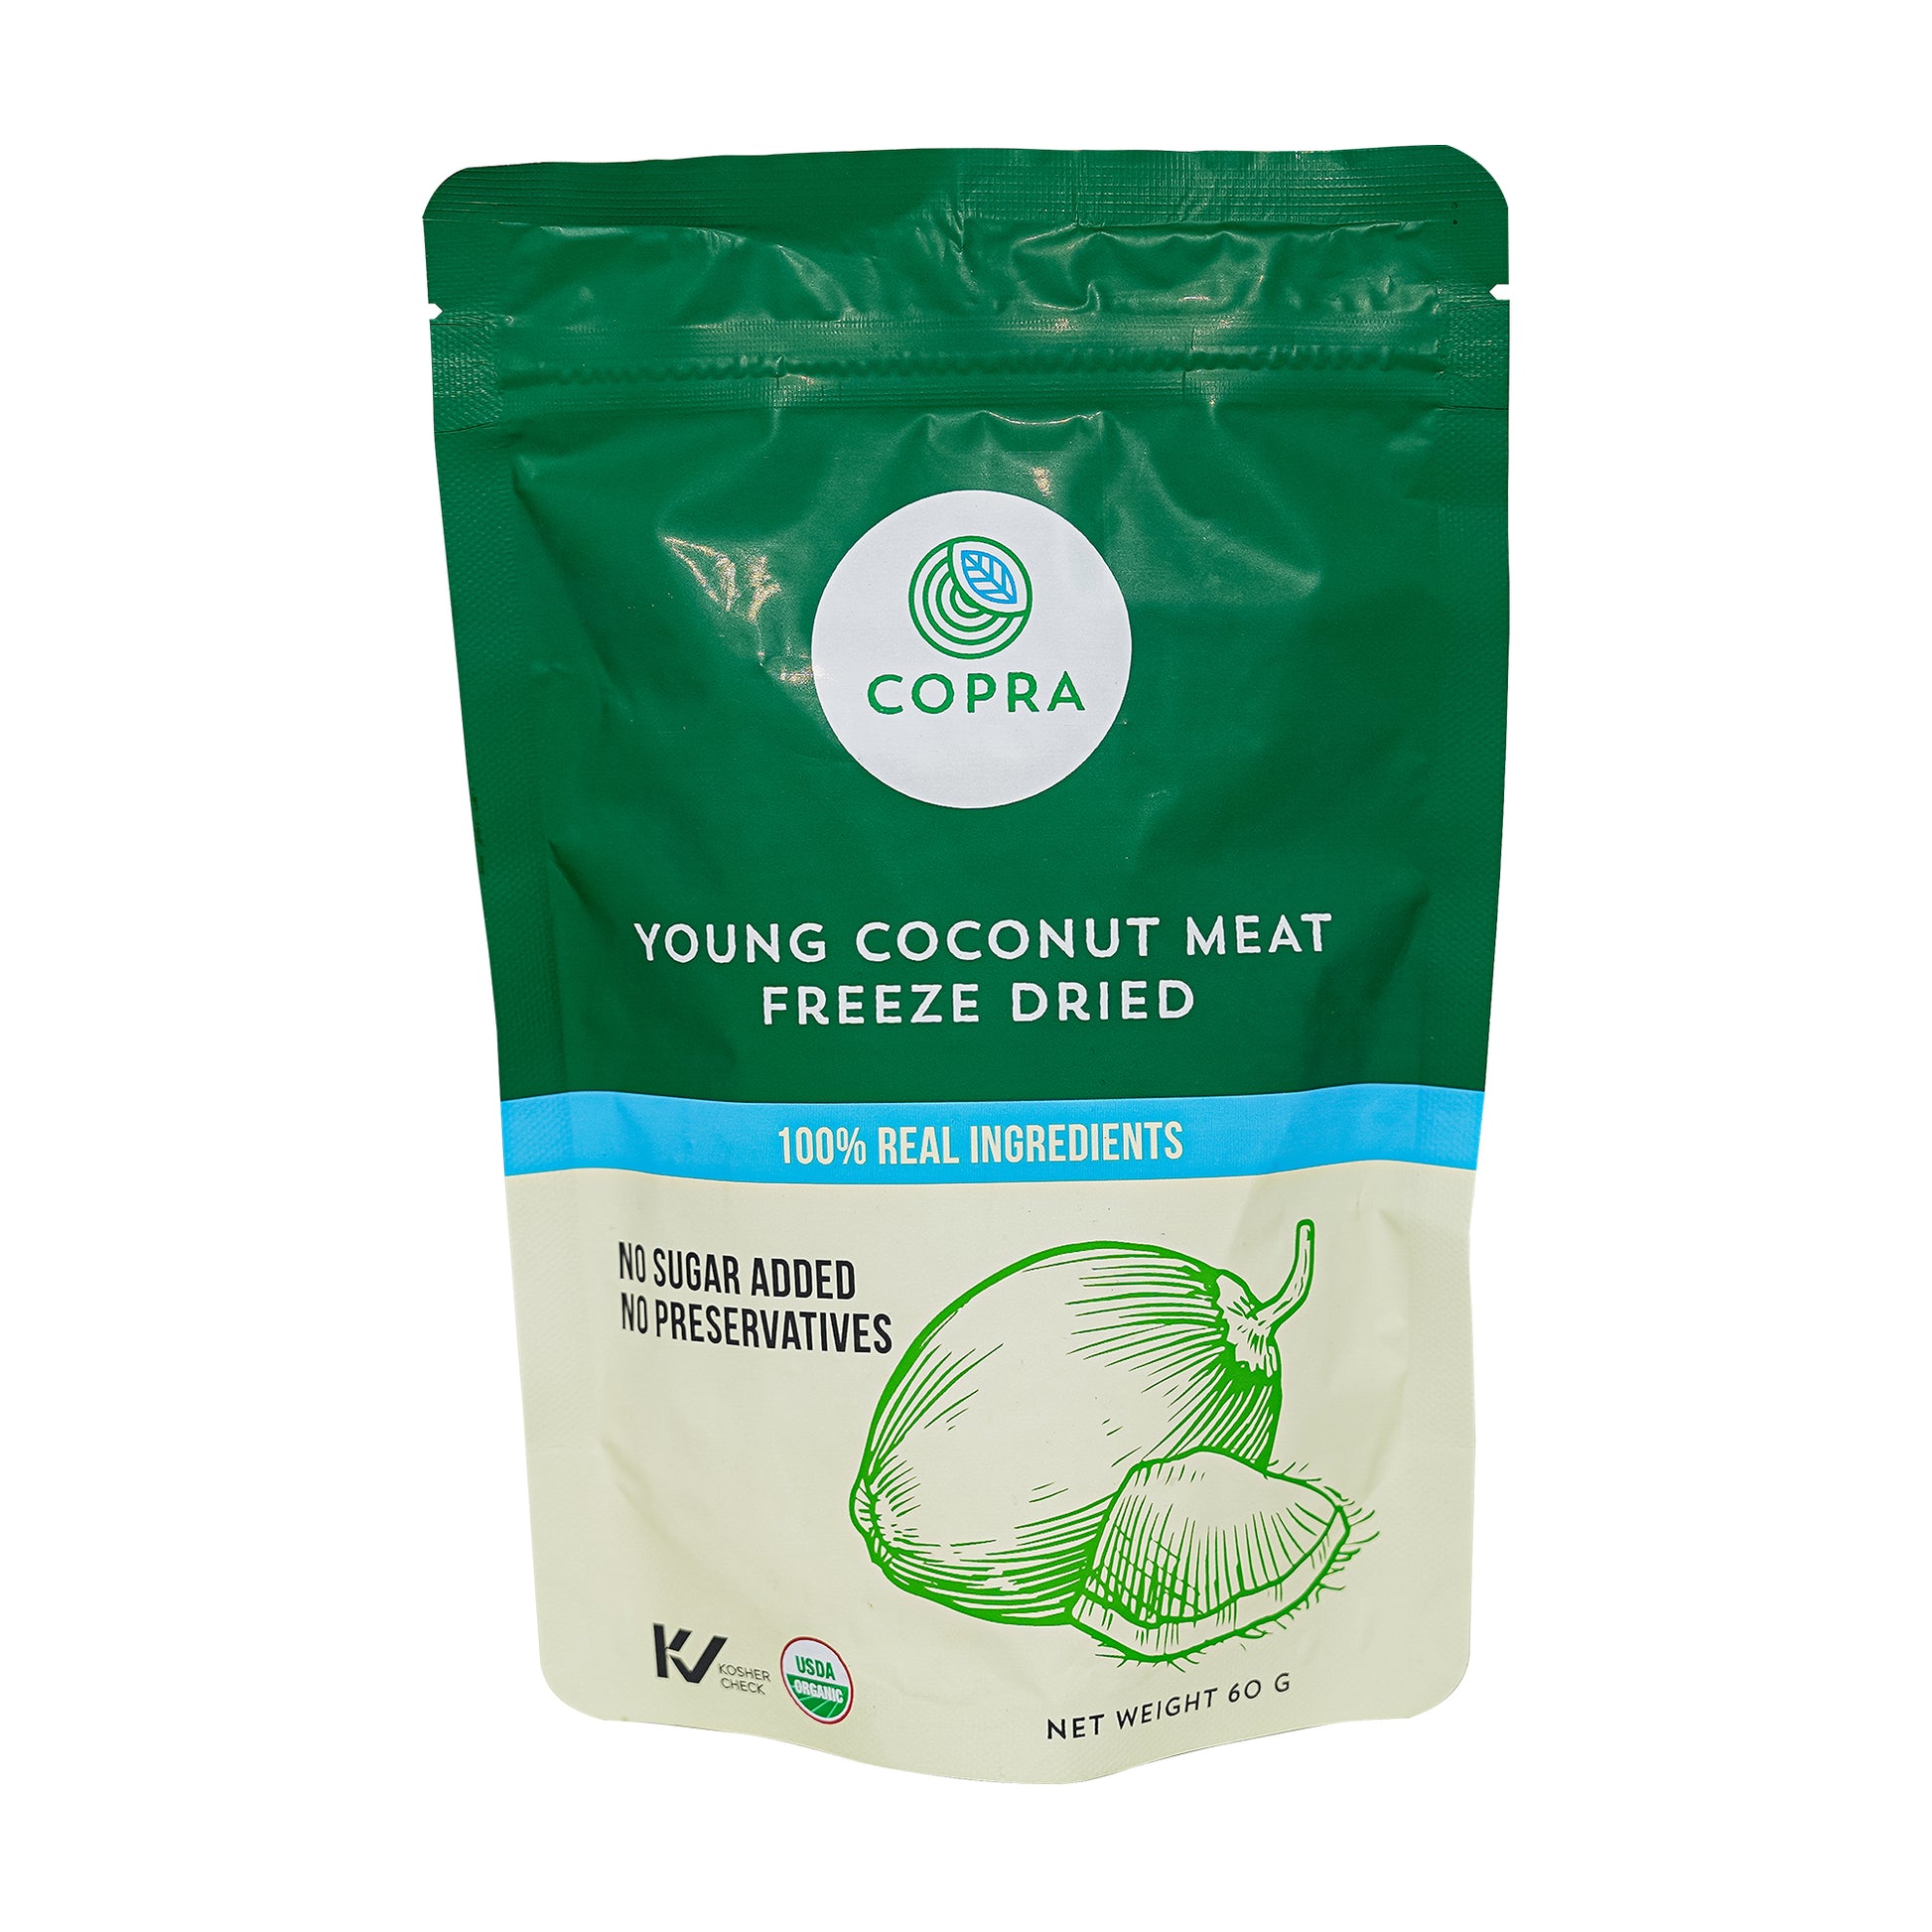 Package of Organic Young Coconut Meat Freeze Dried From Thailand by Copra Coconut